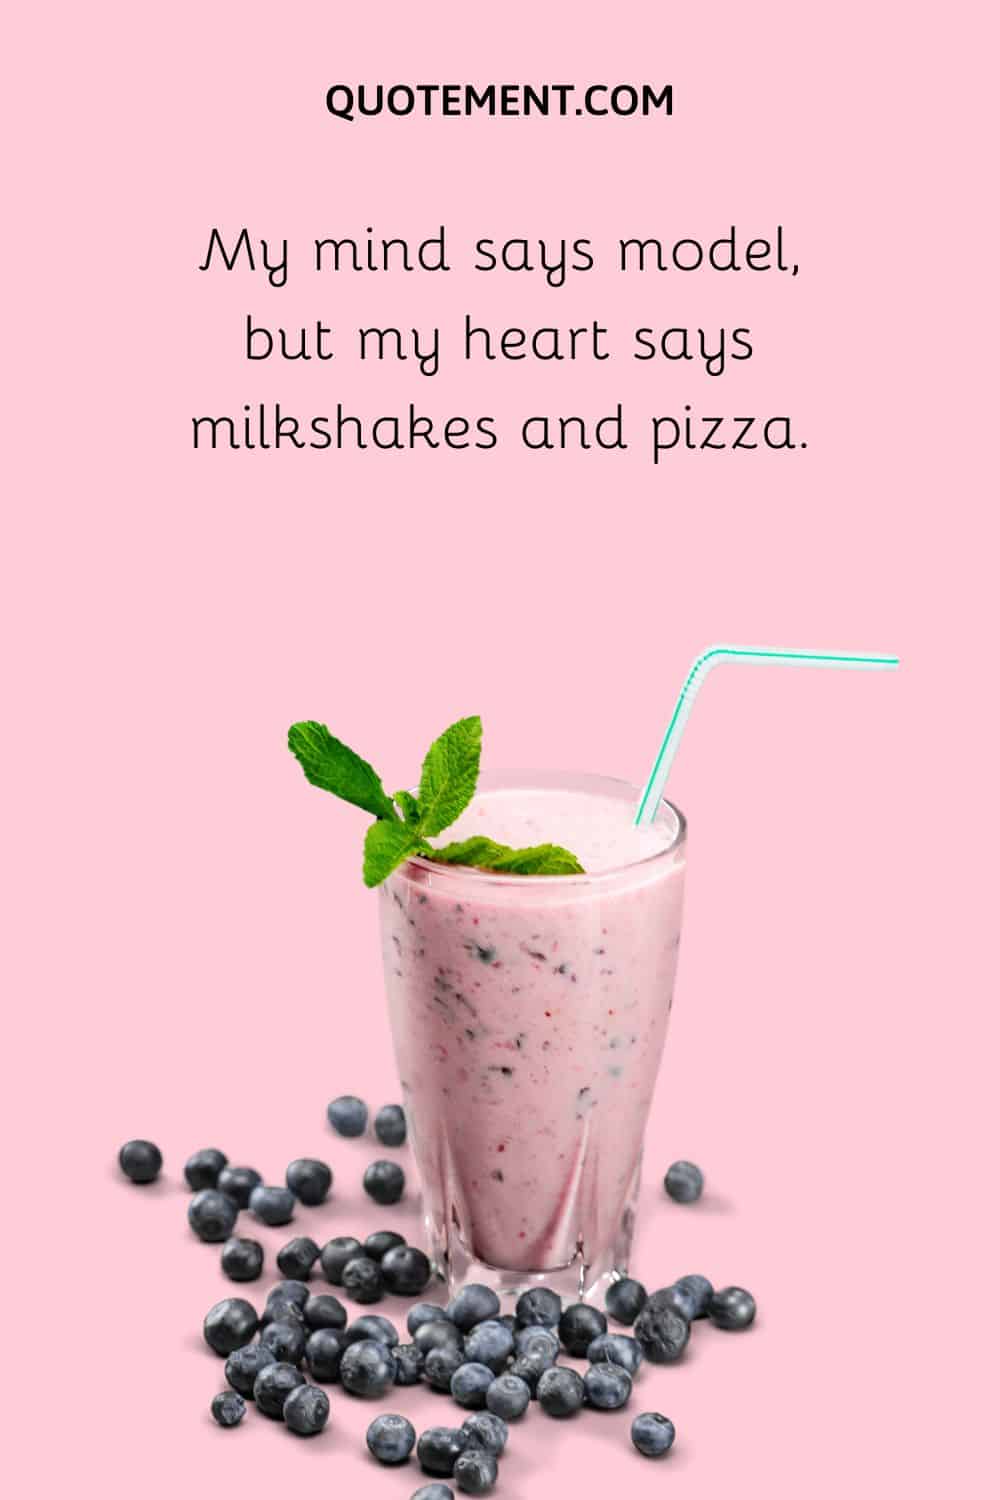 My mind says model, but my heart says milkshakes and pizza.